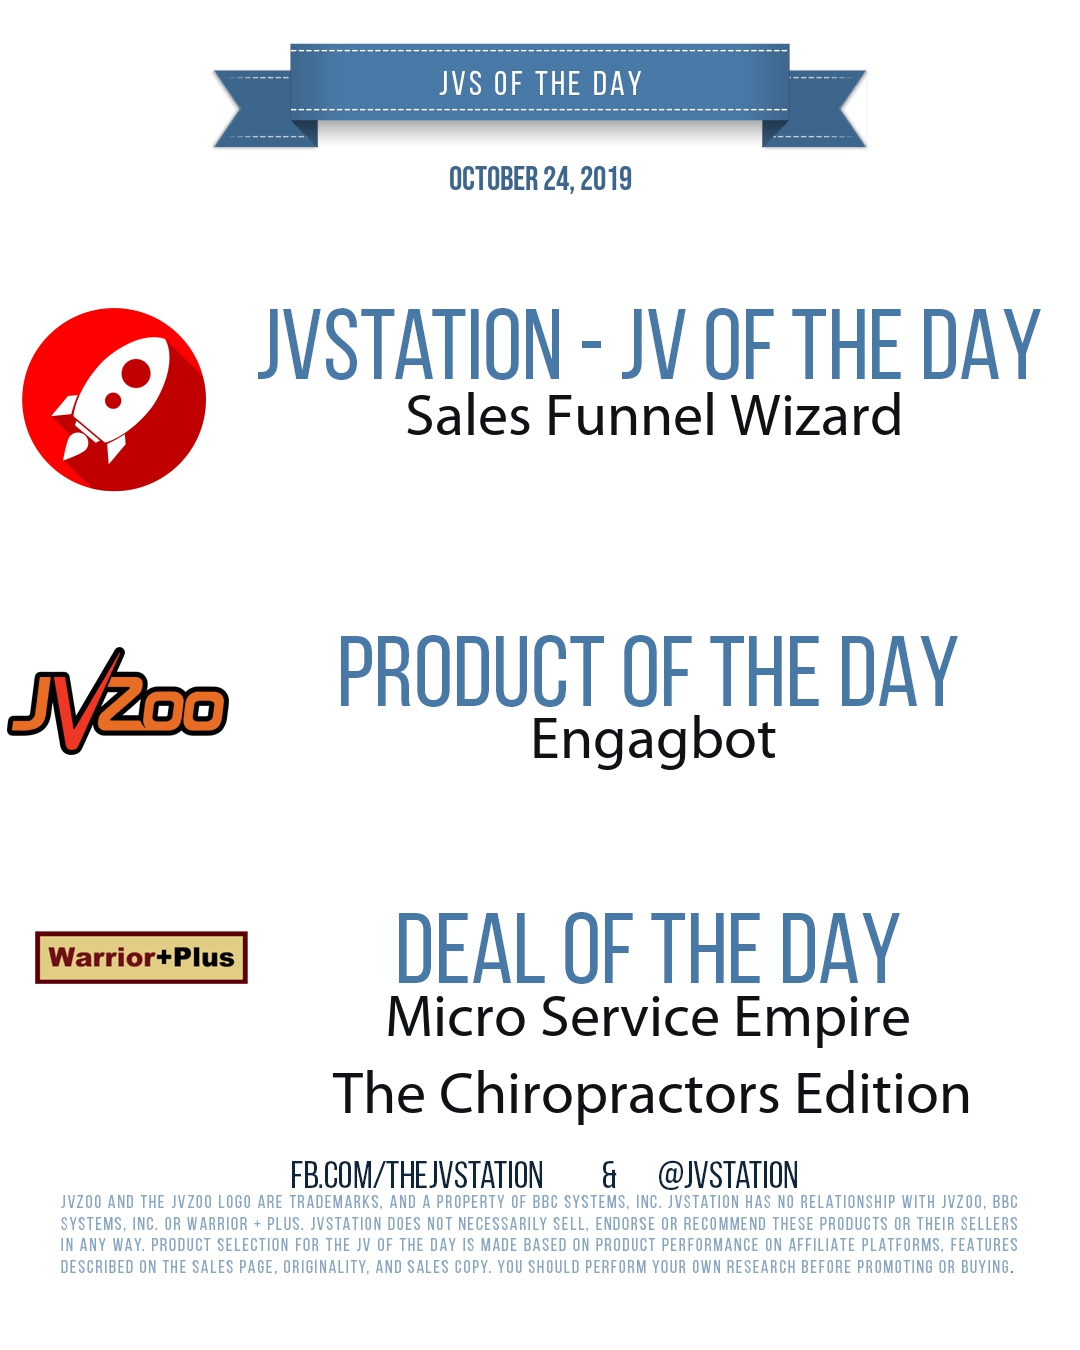 JVs of the day - October 24, 2019